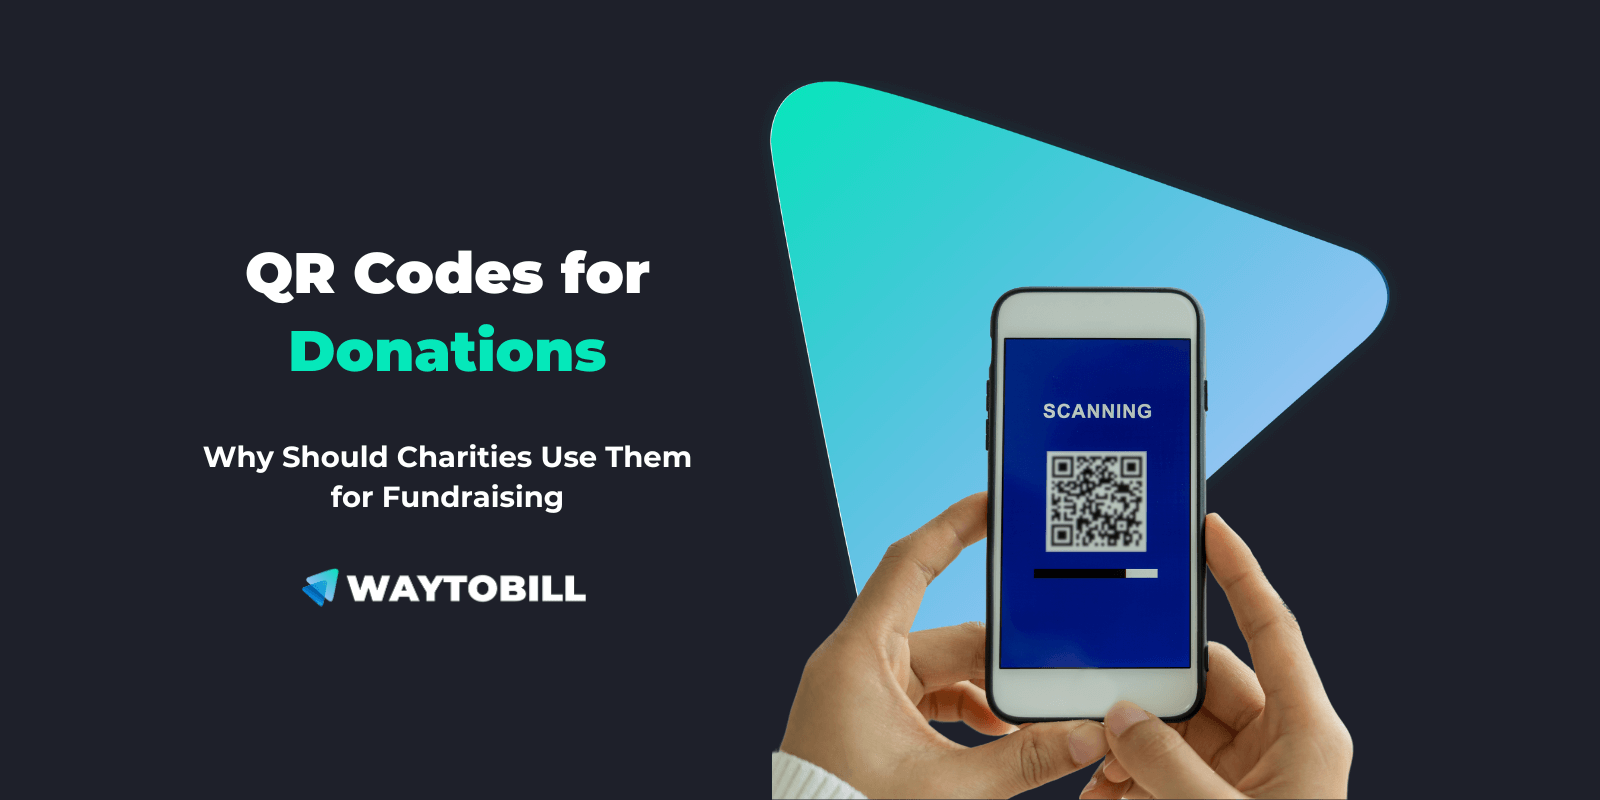 QR Codes for Donations: Why Should Charities Use Them for Fundraising